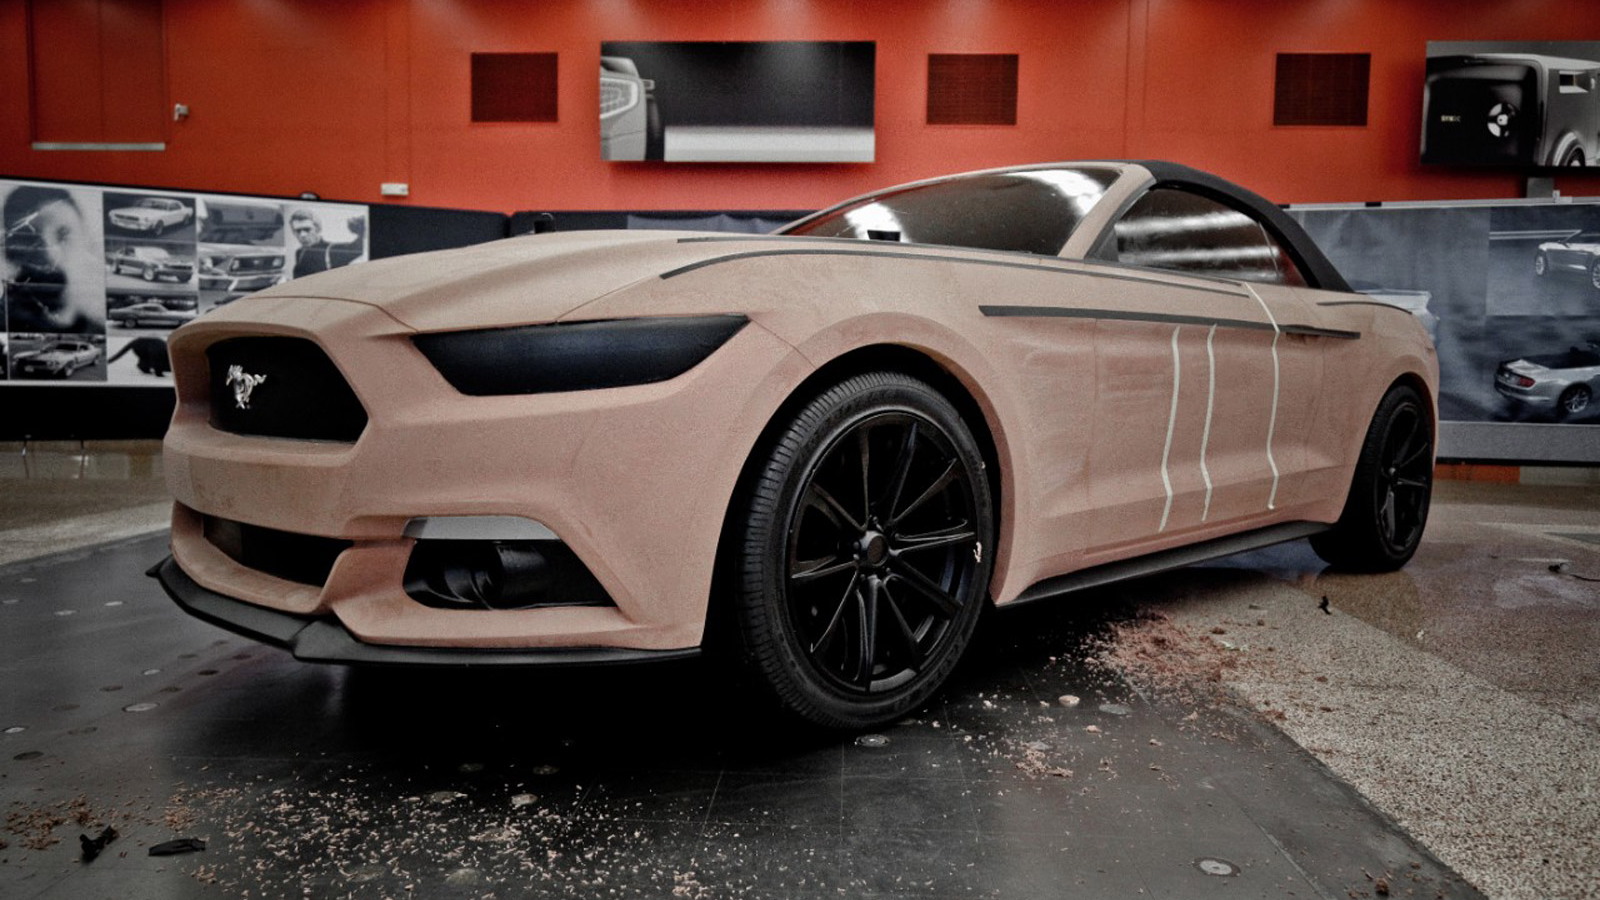 Designing the 2015 Ford Mustang